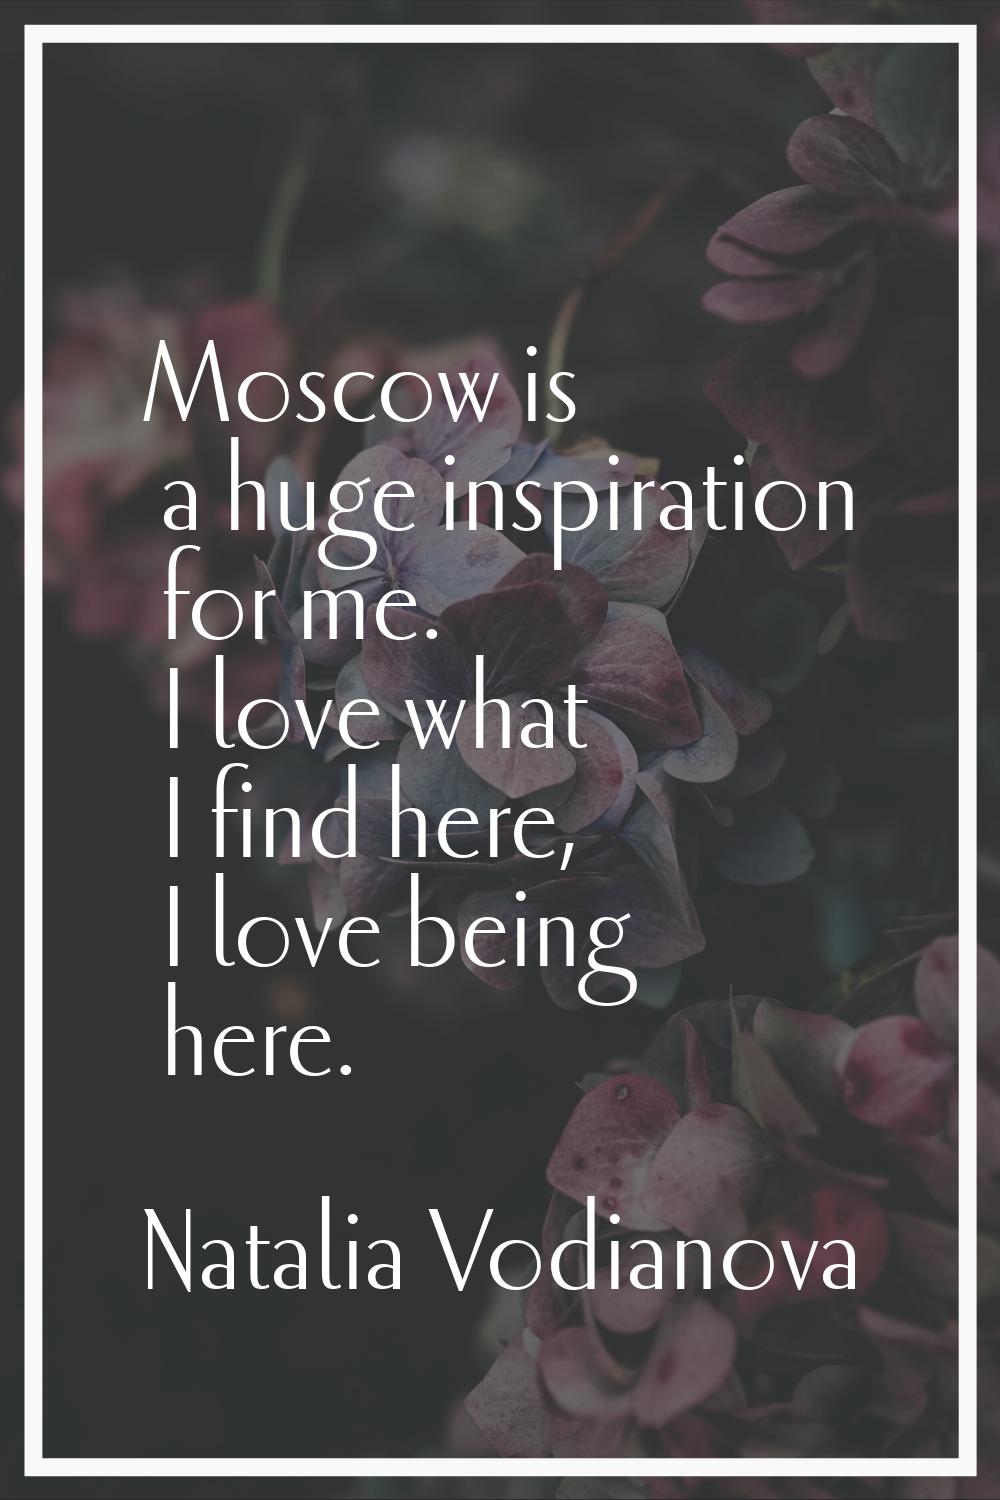 Moscow is a huge inspiration for me. I love what I find here, I love being here.